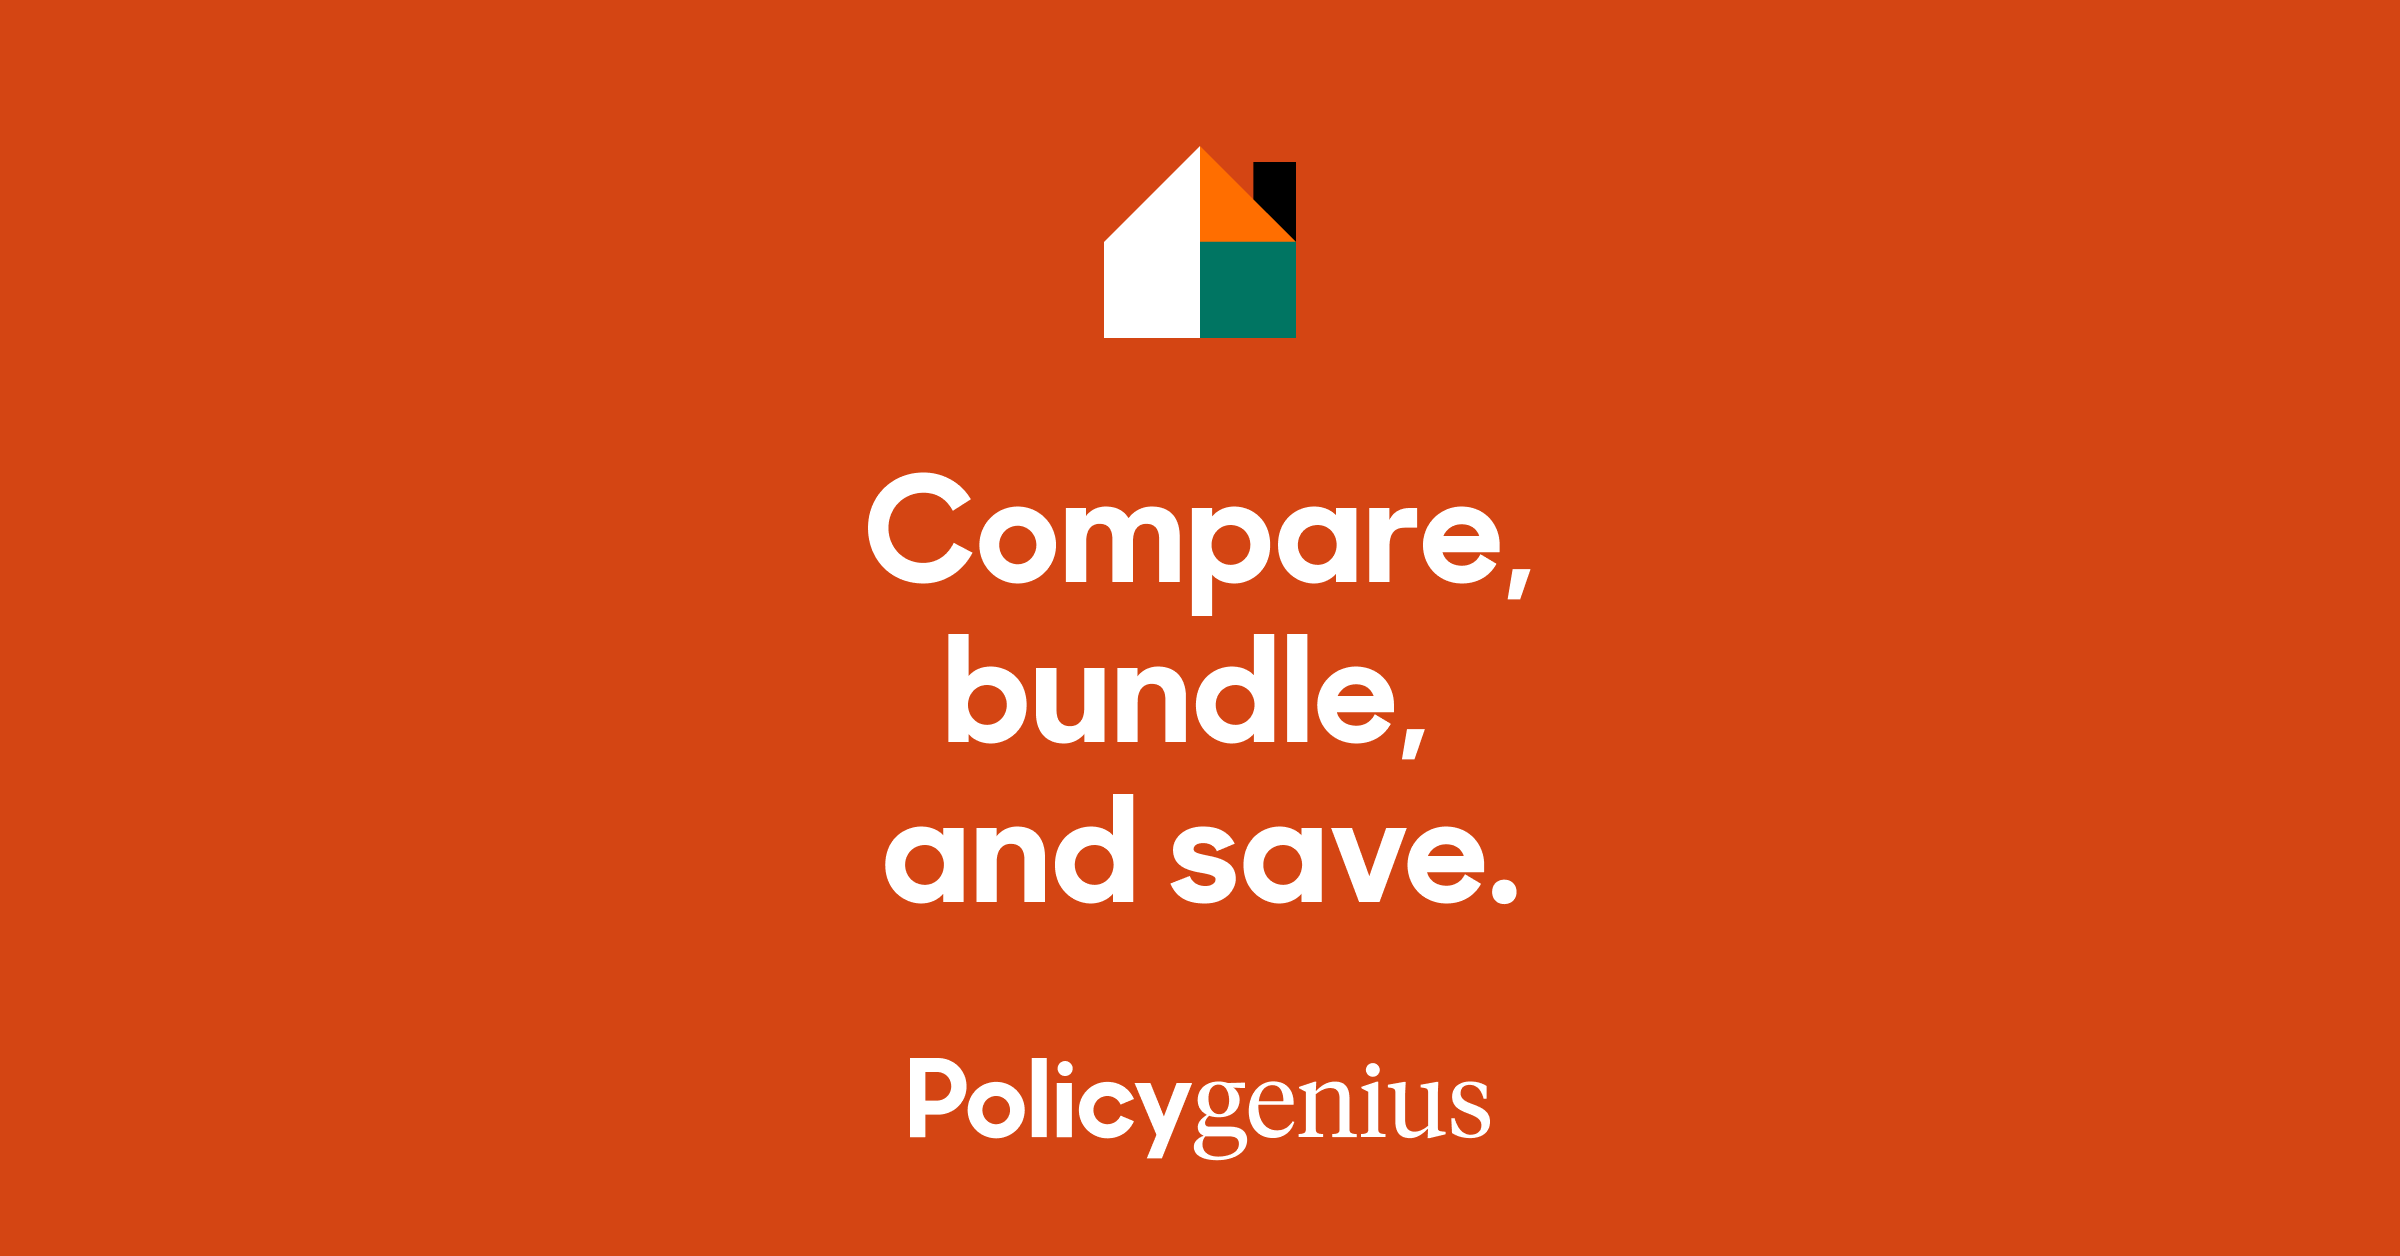 Does Home Insurance Cover Chimney Repairs? - Policygenius